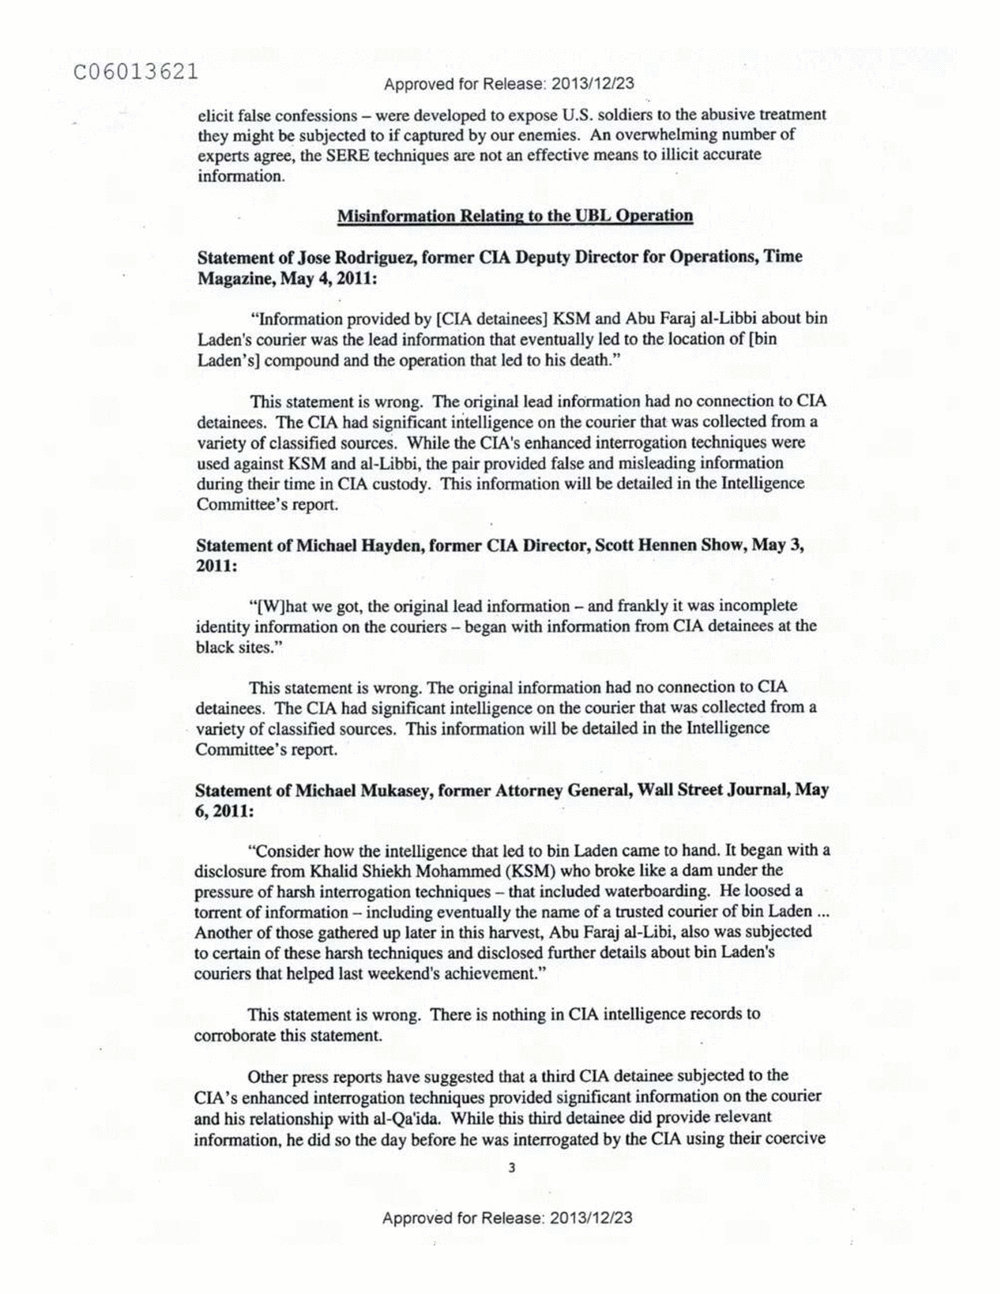 Page 457 from Email Correspondence Between Reporters and CIA Flacks